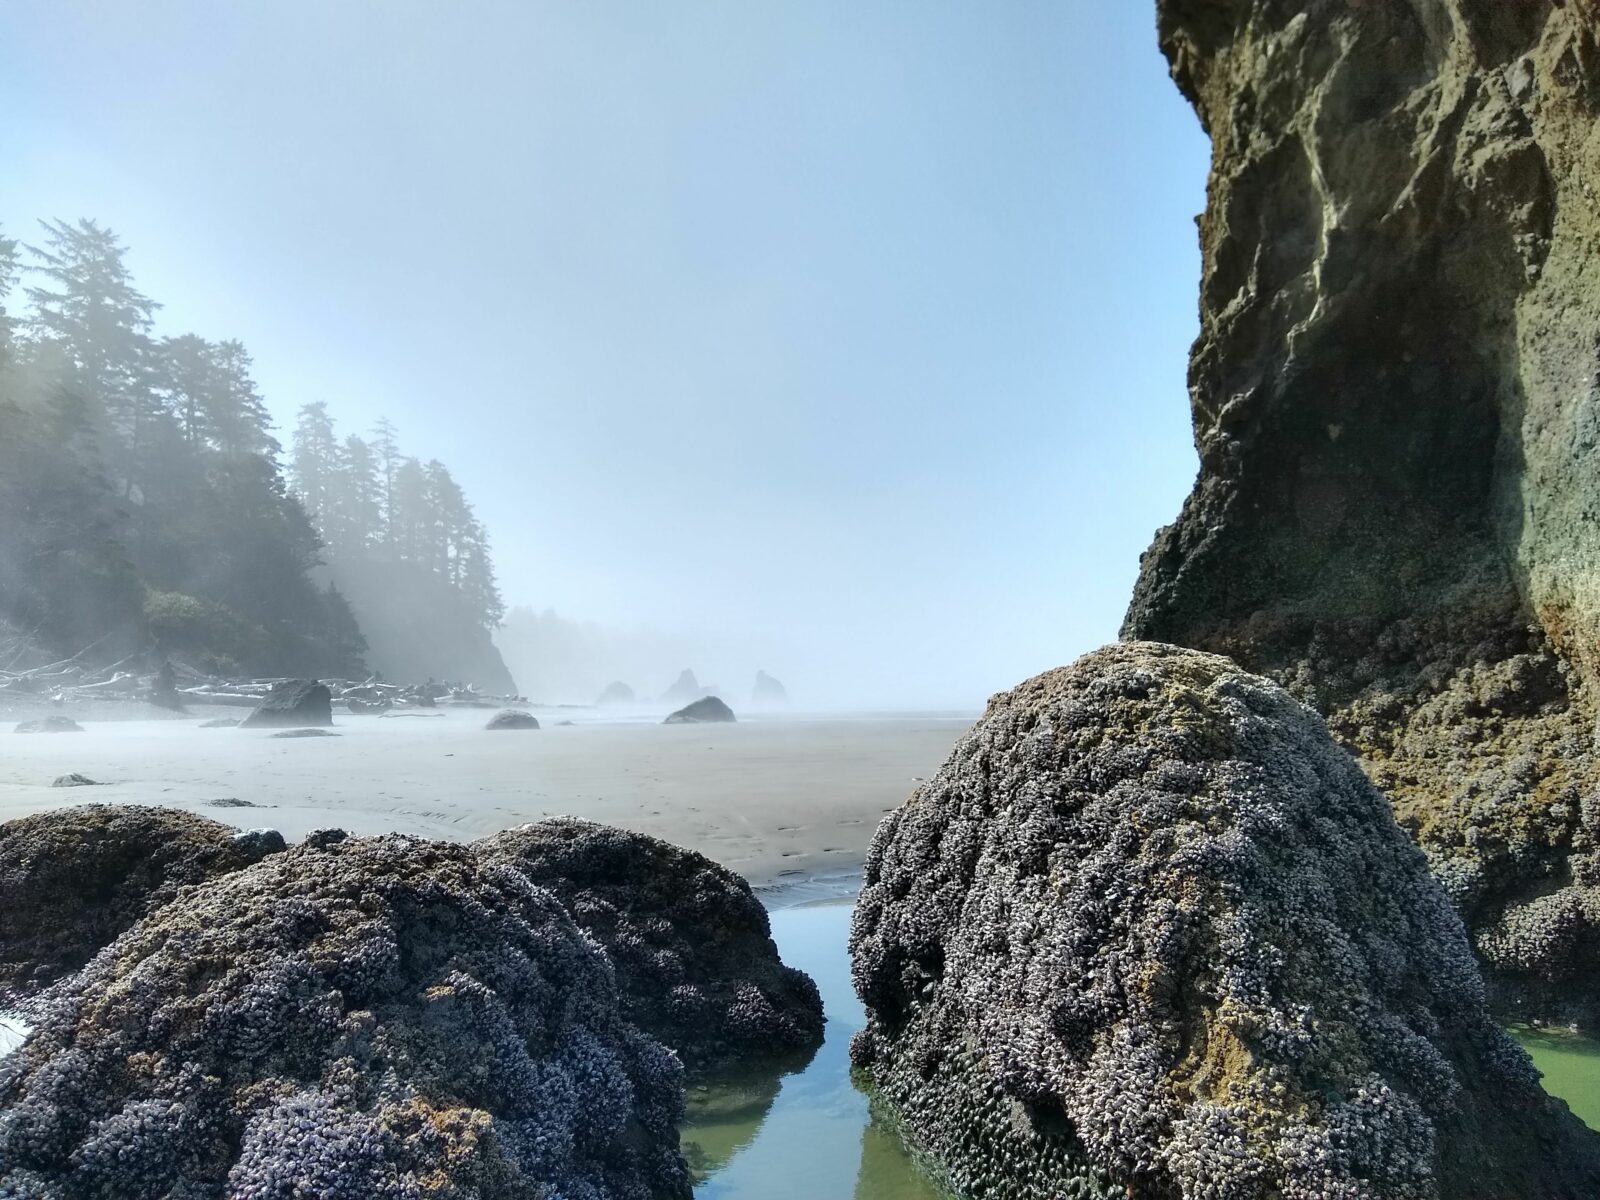 Rocks covered in barnacles on a sandy beach with trees and cliffs shrouded in fog in the distance. There is blue sky above the fog on this Washington beach in Olympic National park